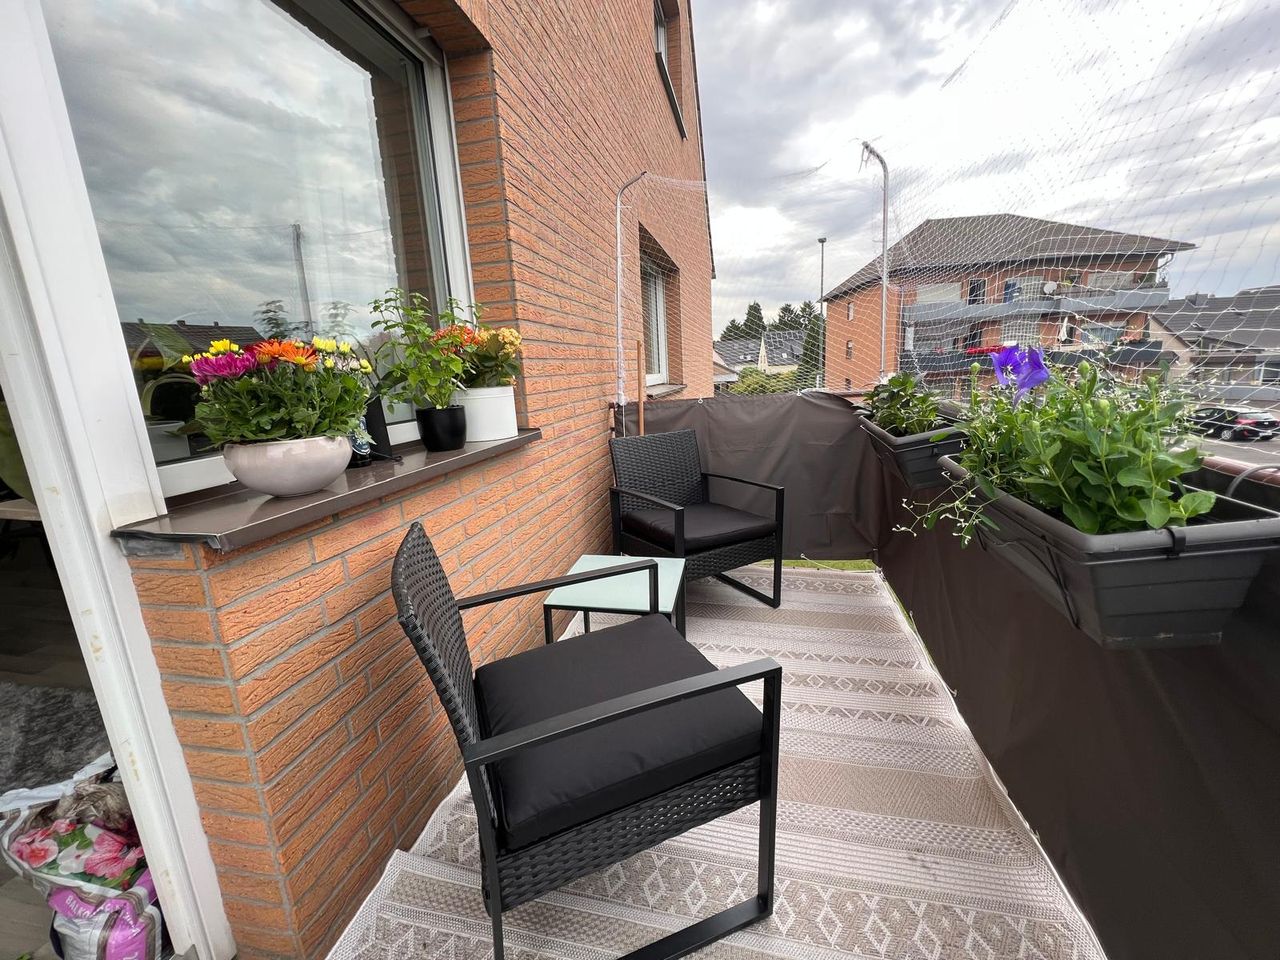 Charming 2-room flat with balcony for rent in the heart of Troisdorf Spich!